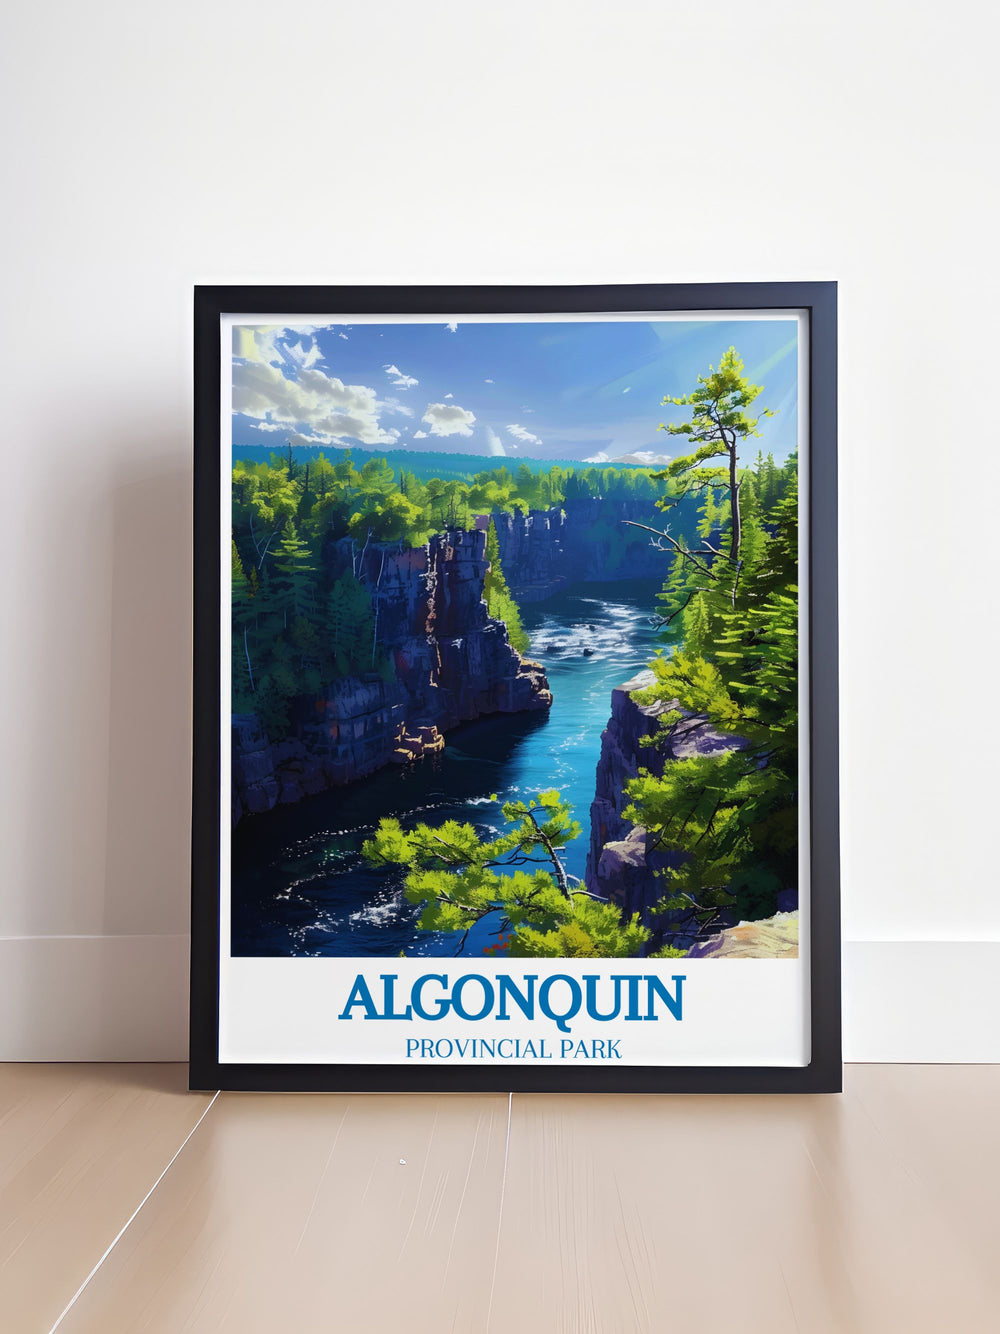 Artistic rendition of Algonquins Barron Canyon, captured in a contemporary print that highlights the serene and wild aspects of Canadian landscapes.